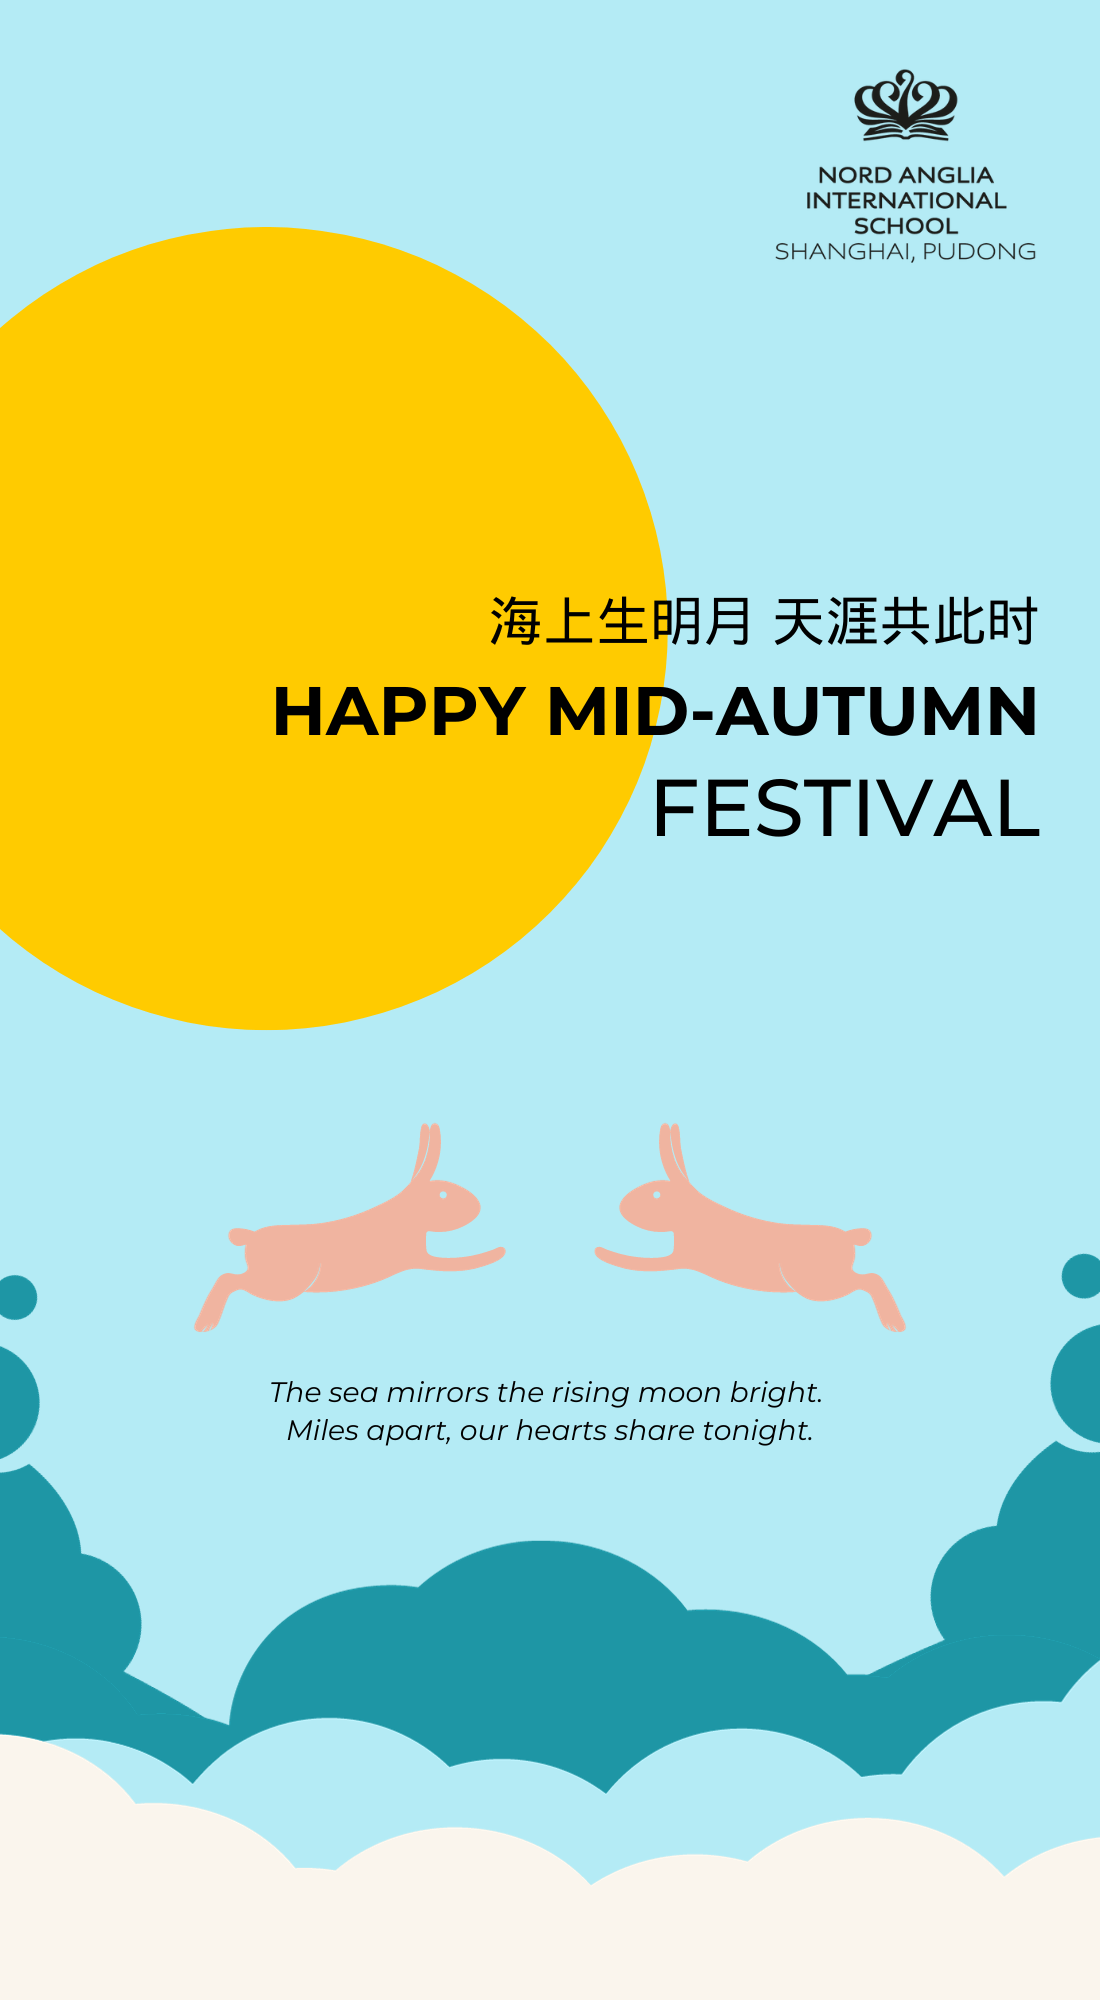 Happy Mid-Autumn Festival from NAIS Pudong - Happy Mid-Autumn Festival from NAIS Pudong